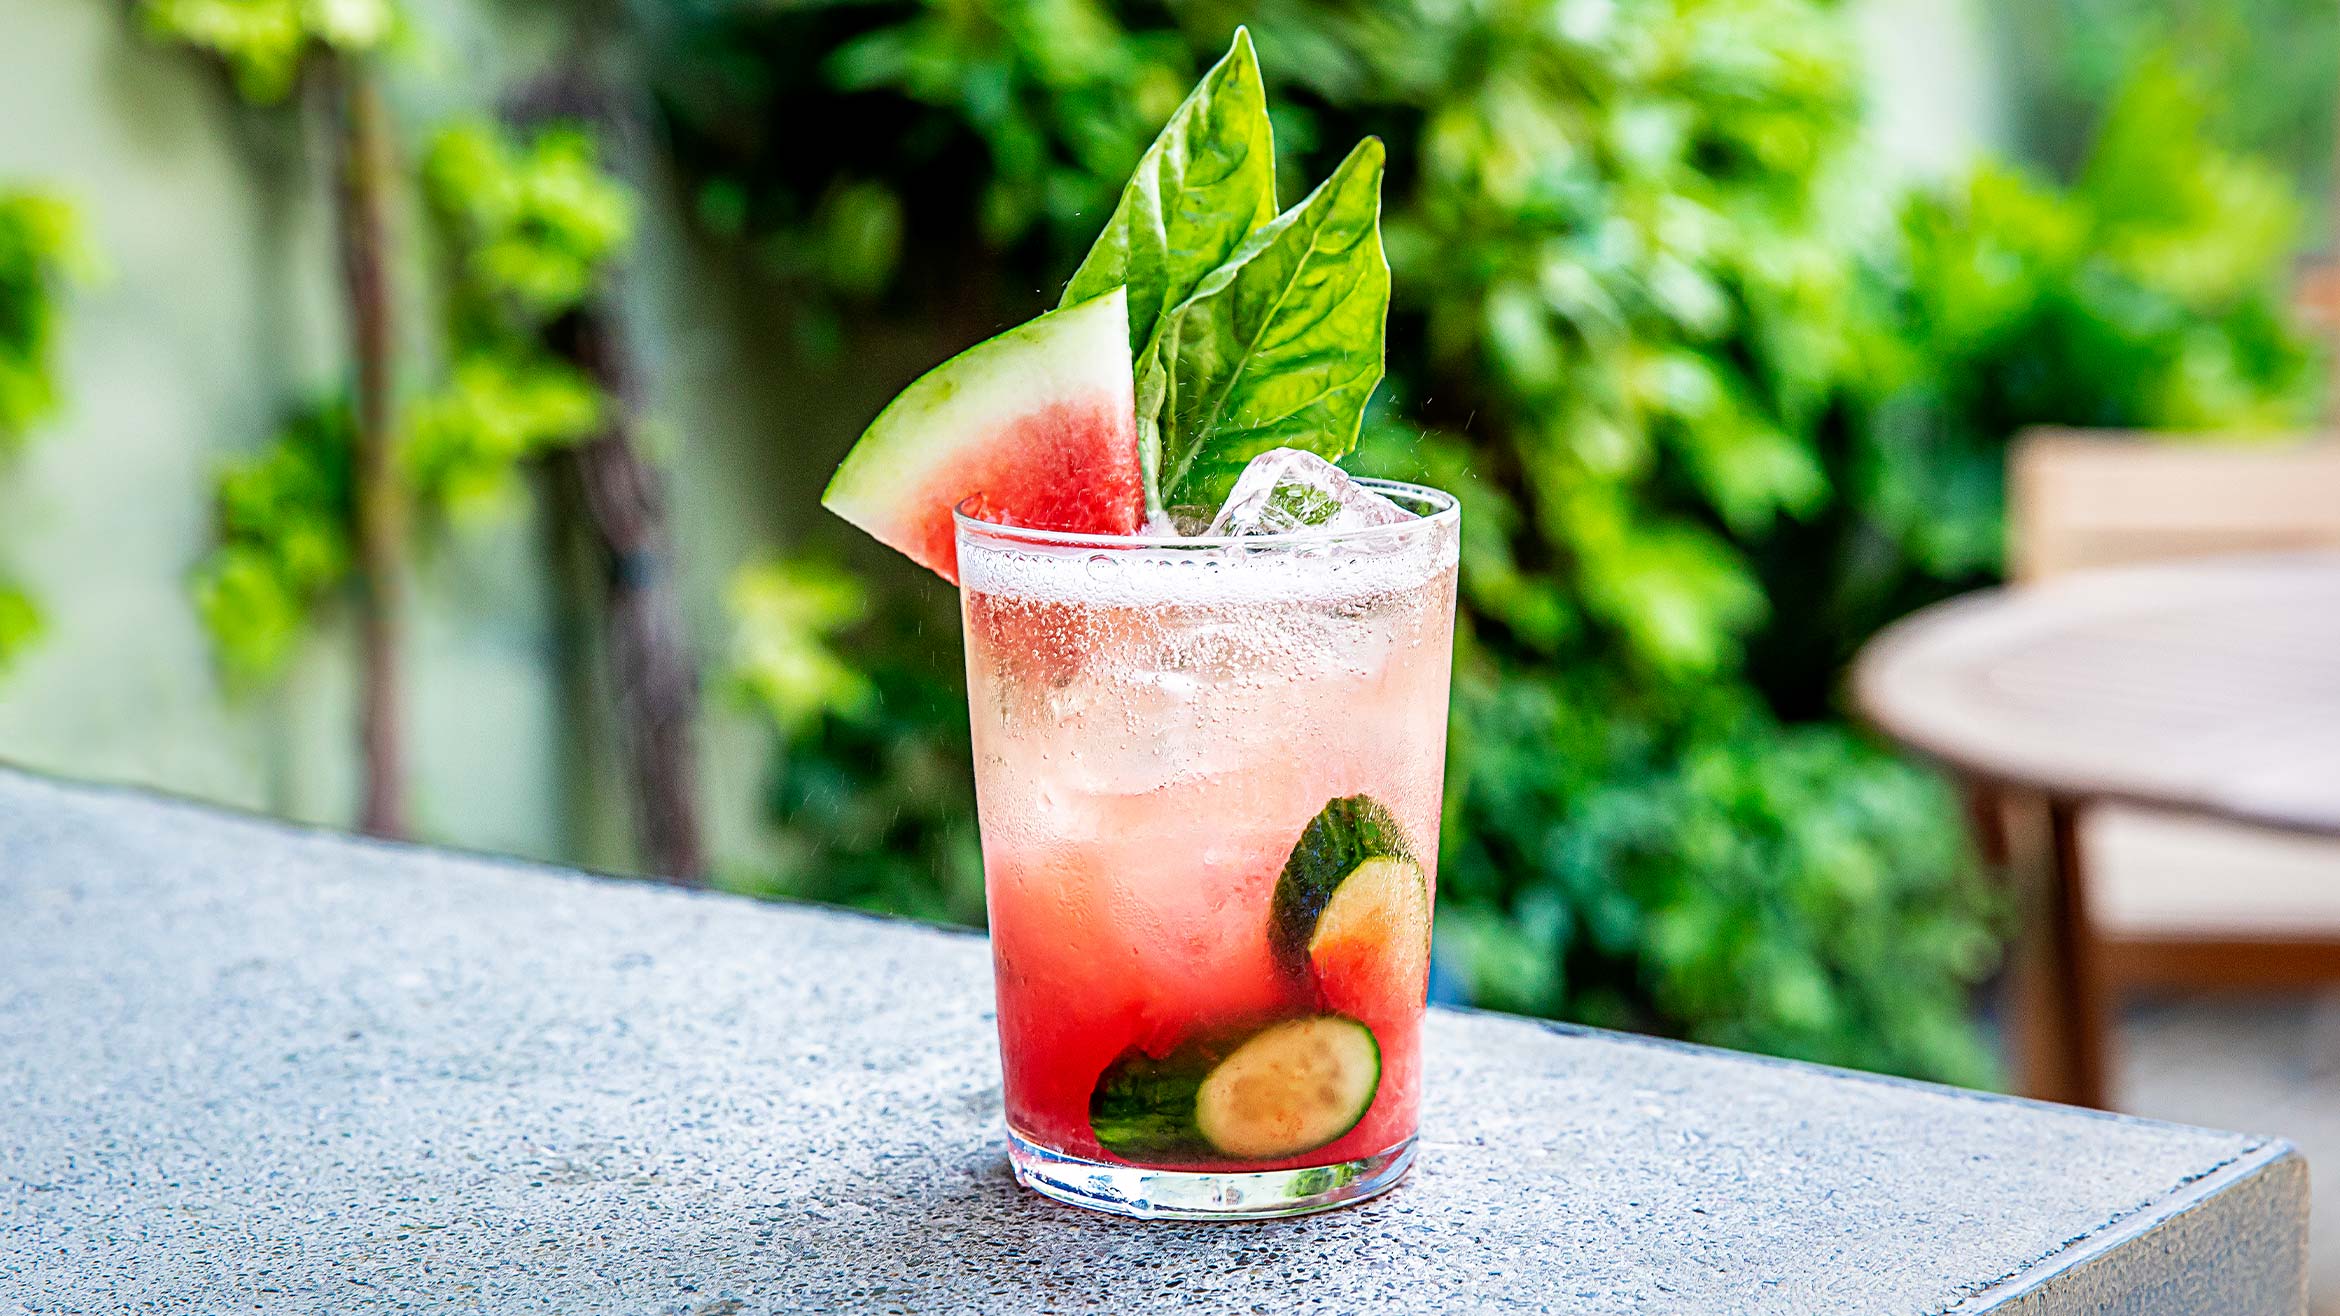 The Watermelon Drink Is Built to Please